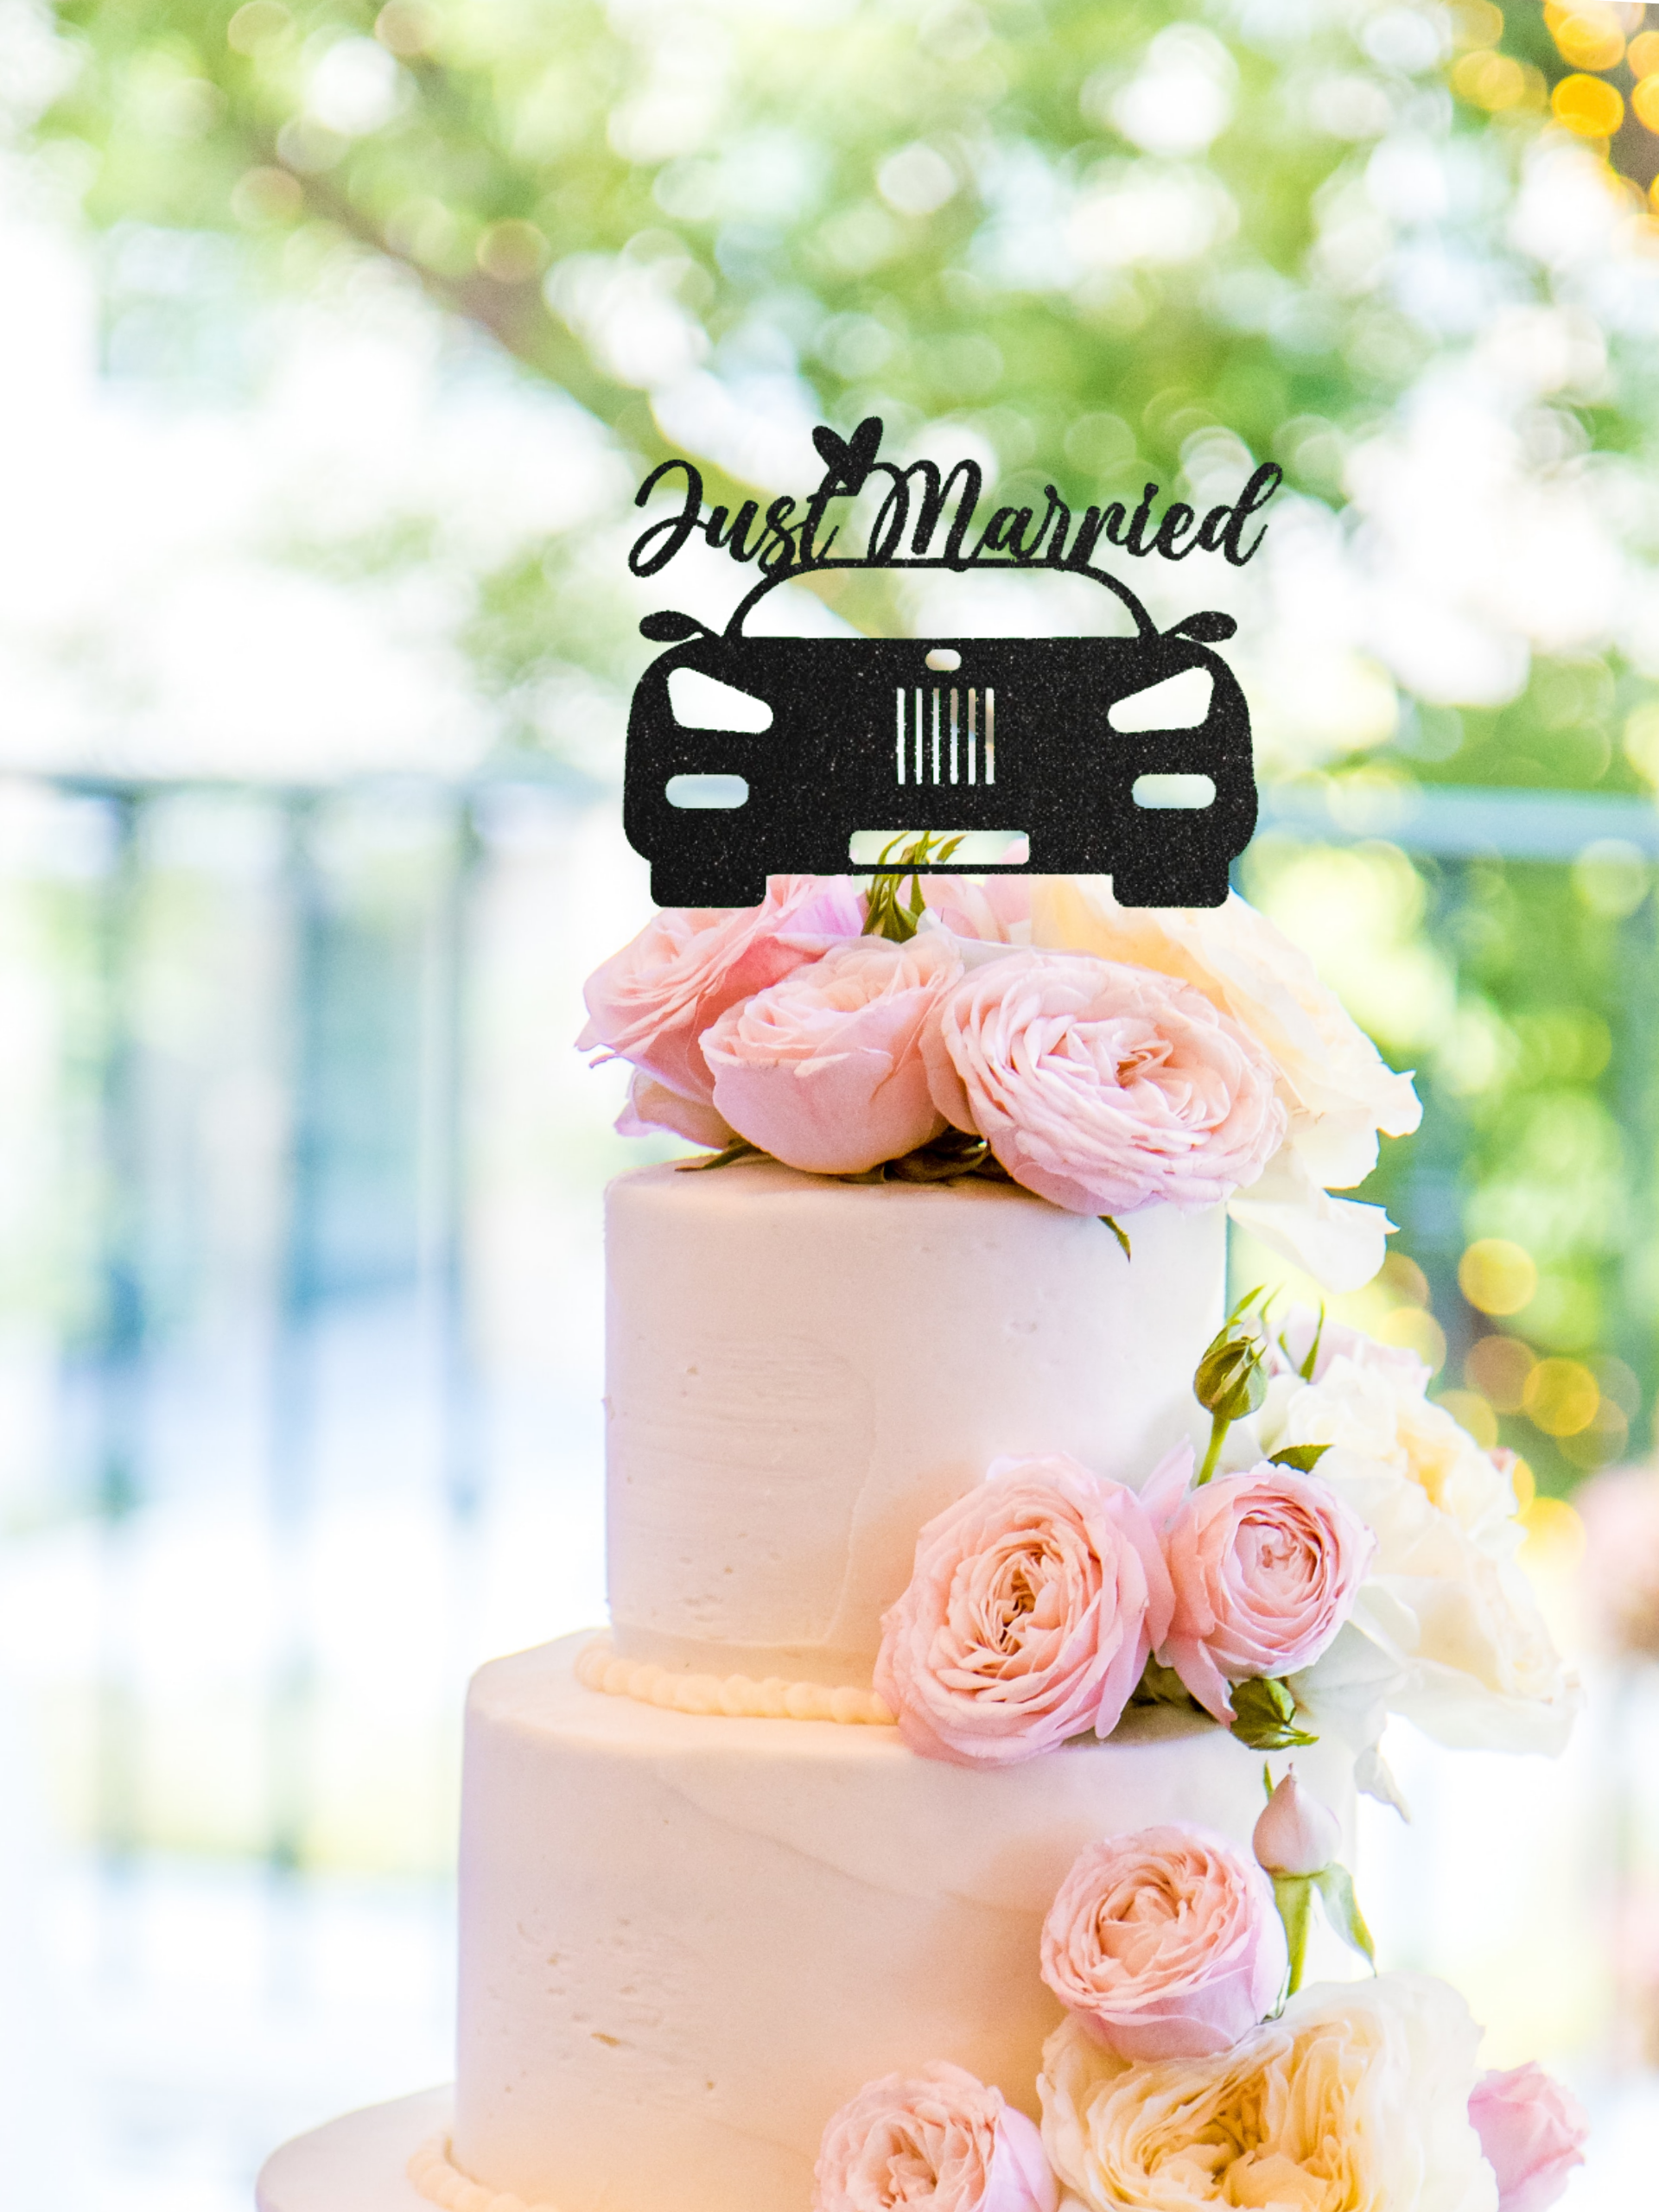 Just married cake topper wedding